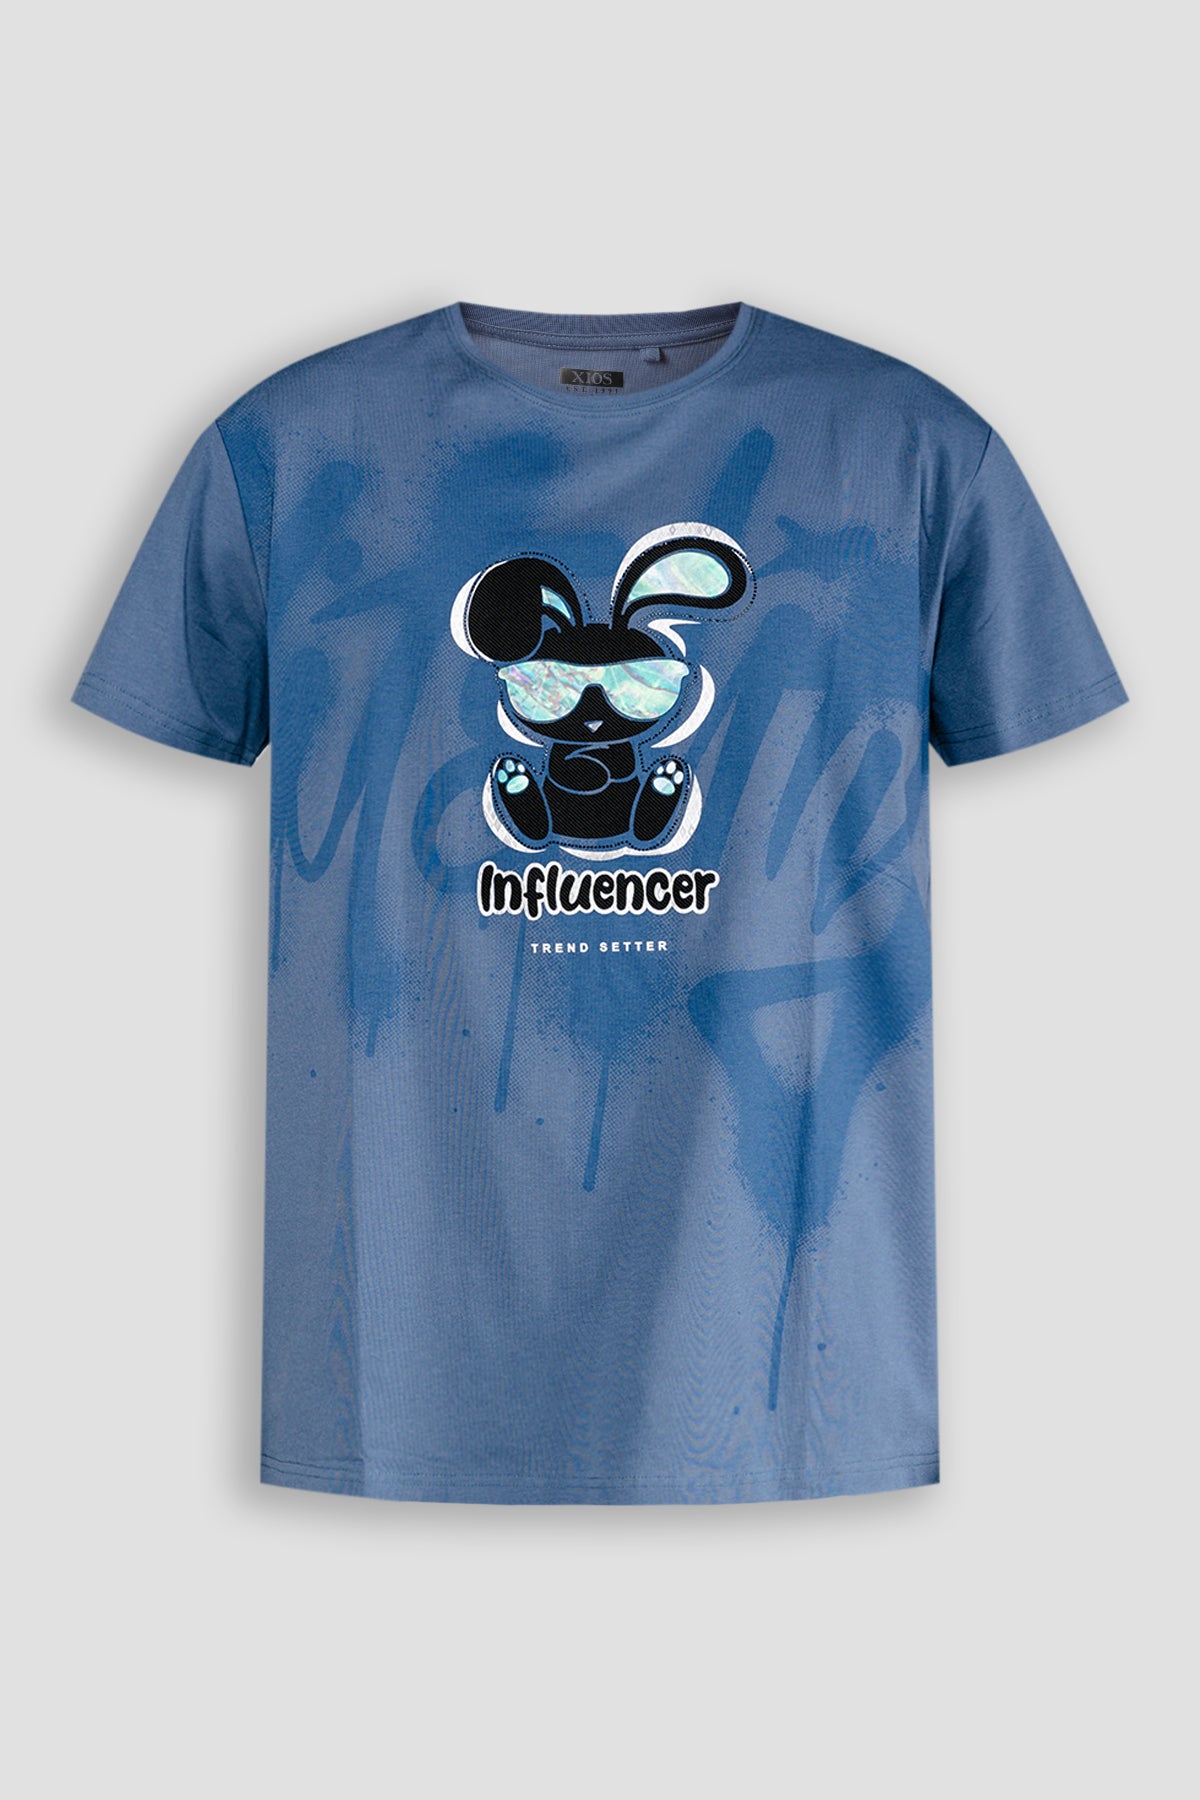 "Influencer" Graphic Tee